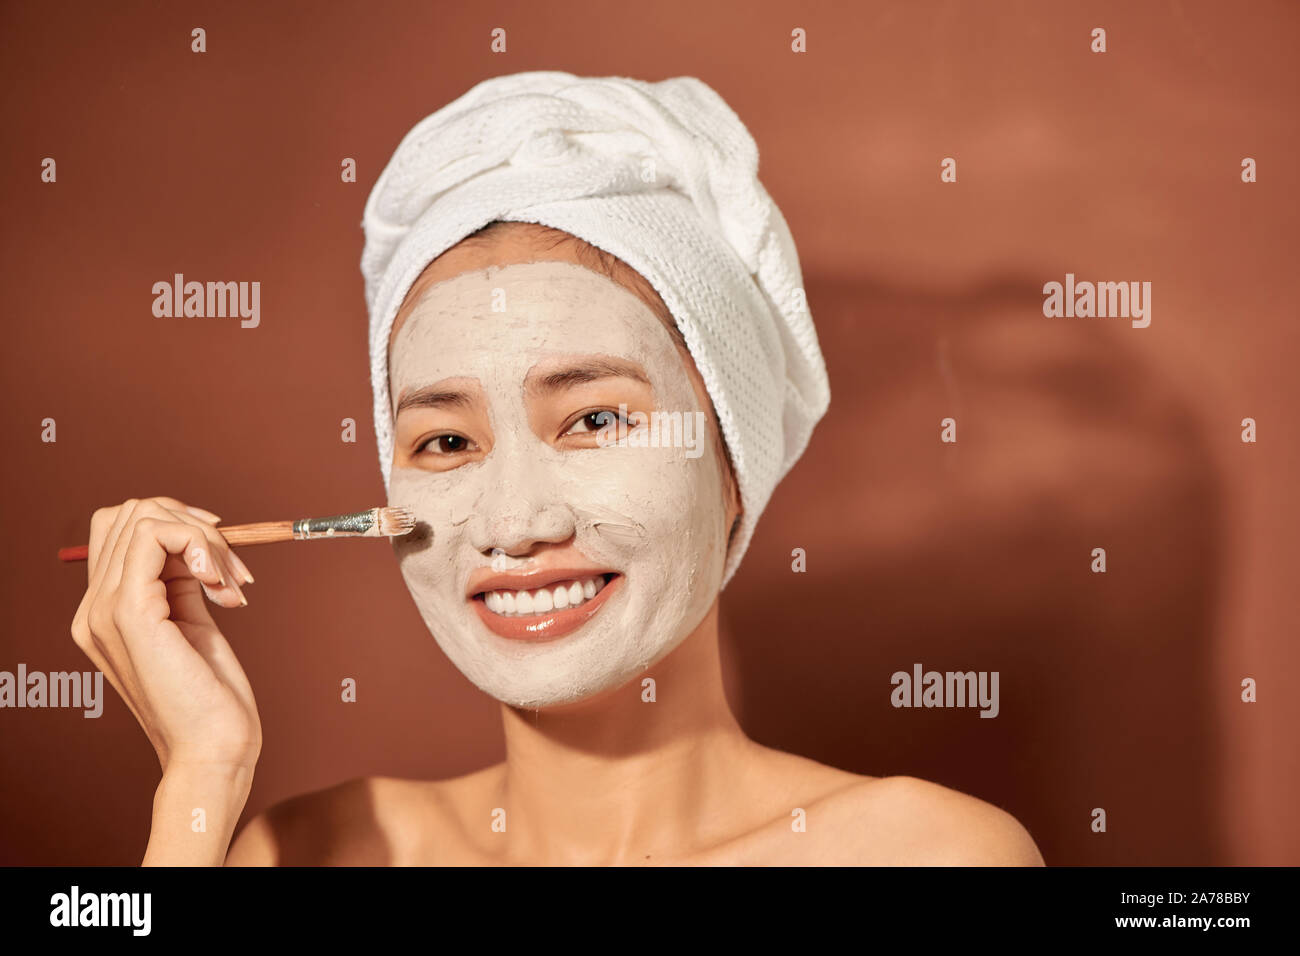 Beautiful Asian woman applying facial mask on her face. Skin care and treatment, spa, natural beauty and cosmetology concept. Stock Photo